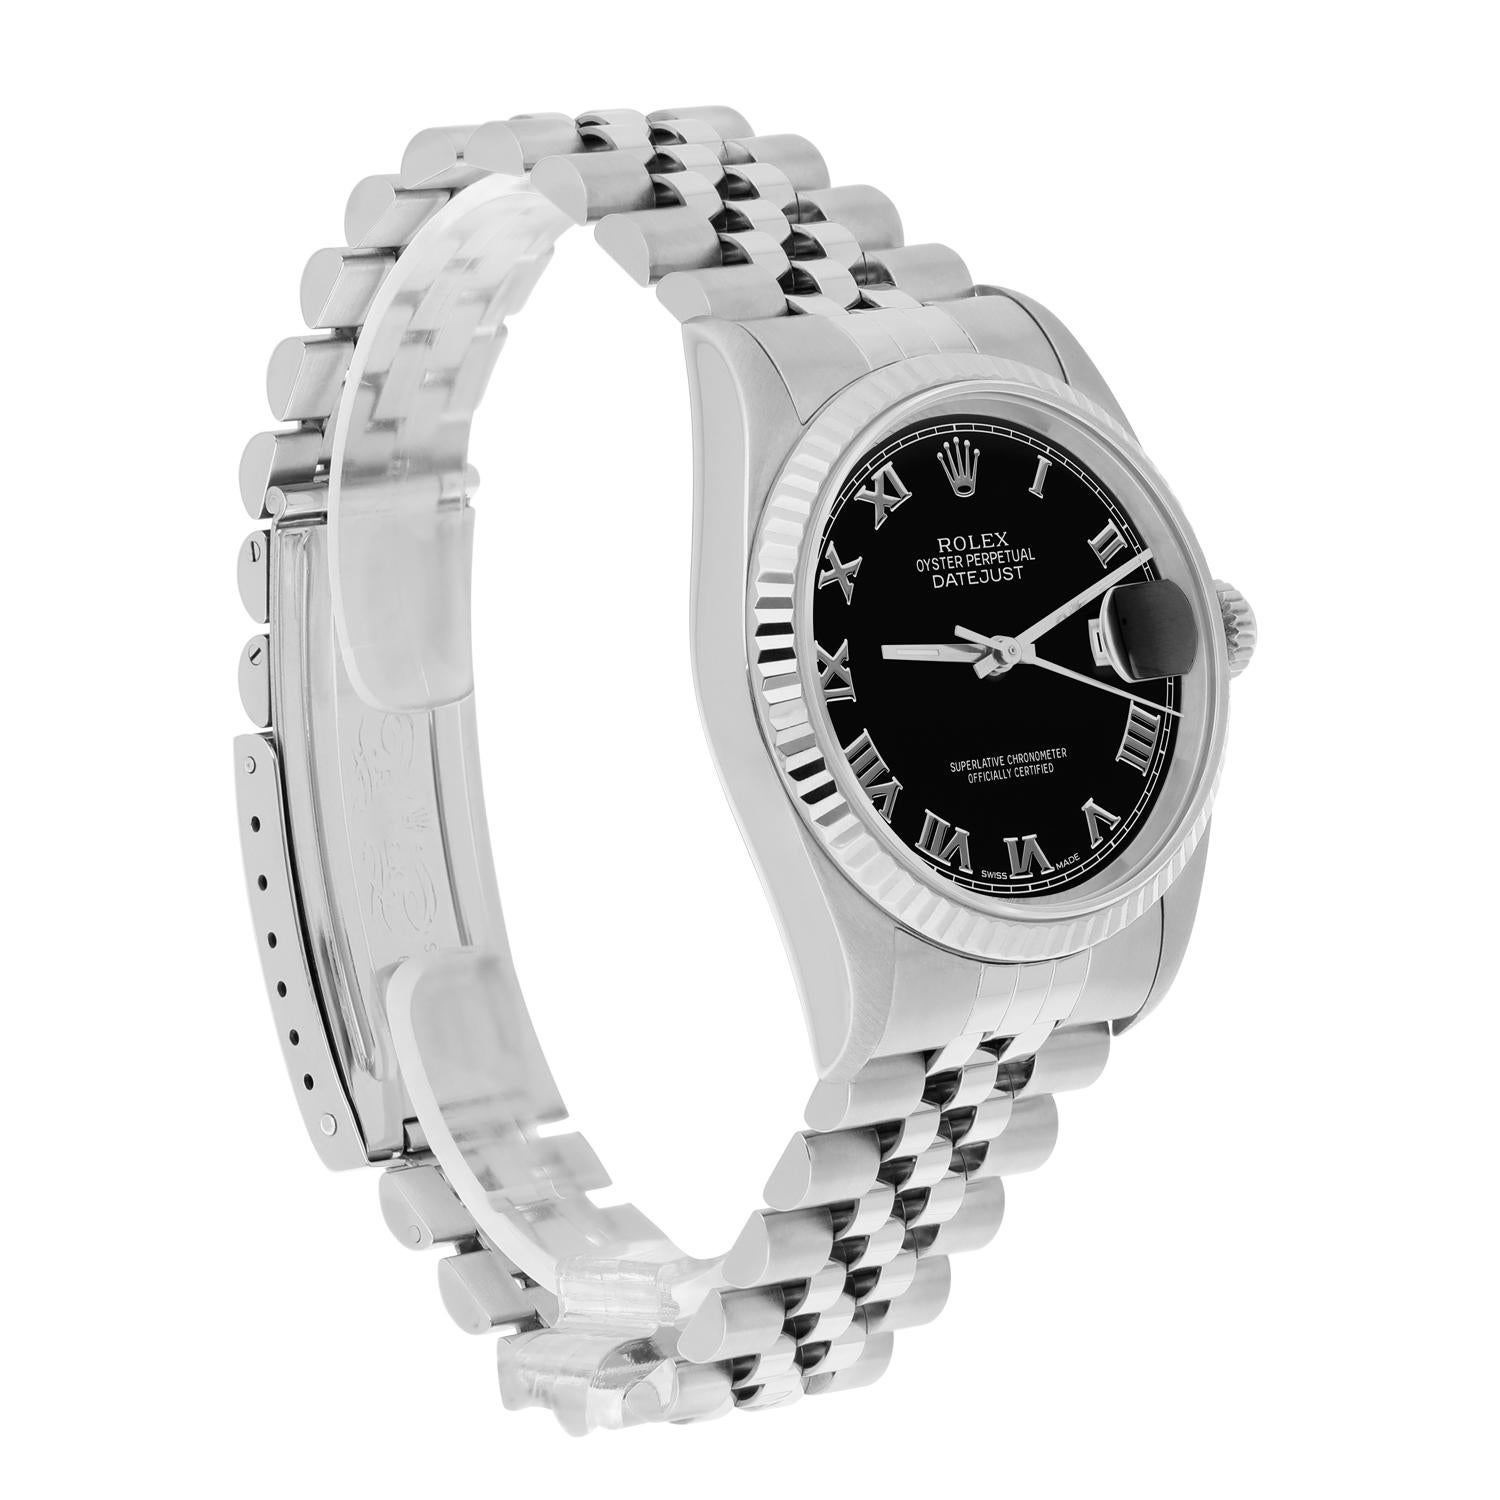 Rolex Datejust 36mm Stainless Steel 16234 Black Roman Dial, Jubilee Circa 1995 For Sale 2